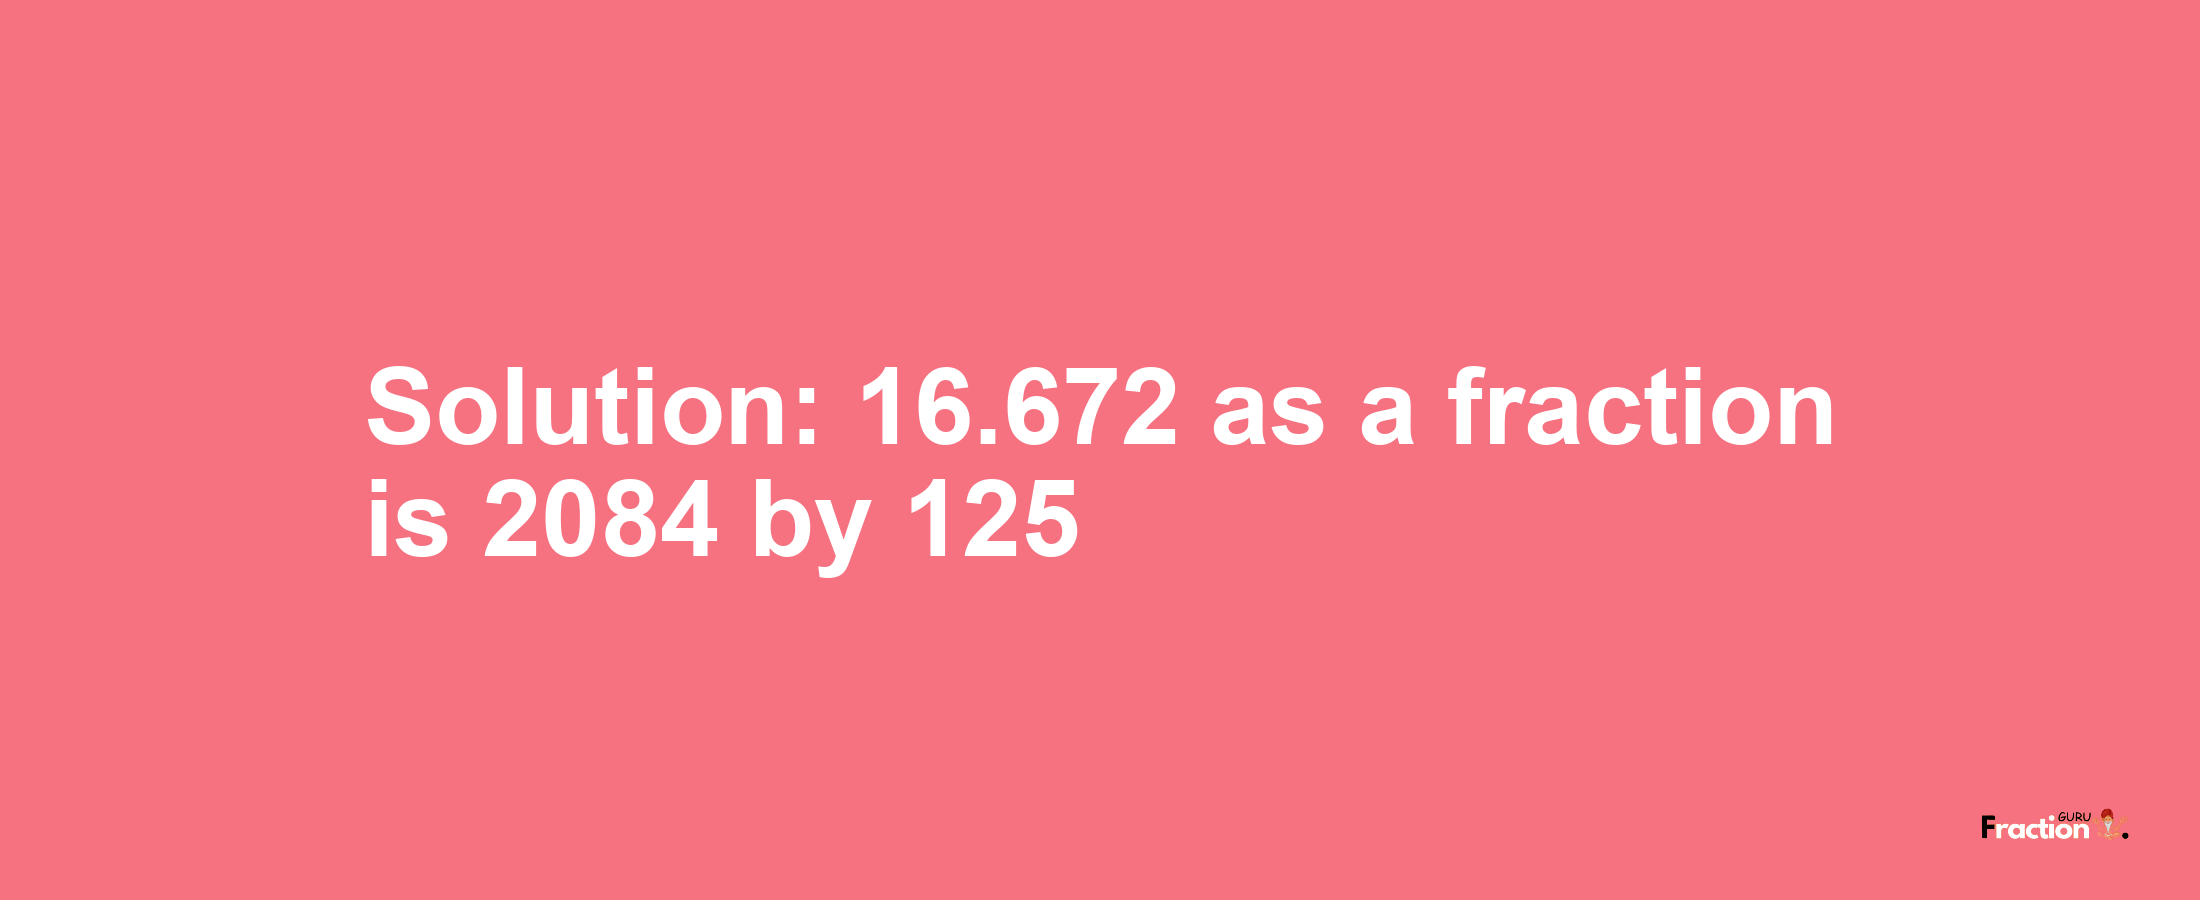 Solution:16.672 as a fraction is 2084/125